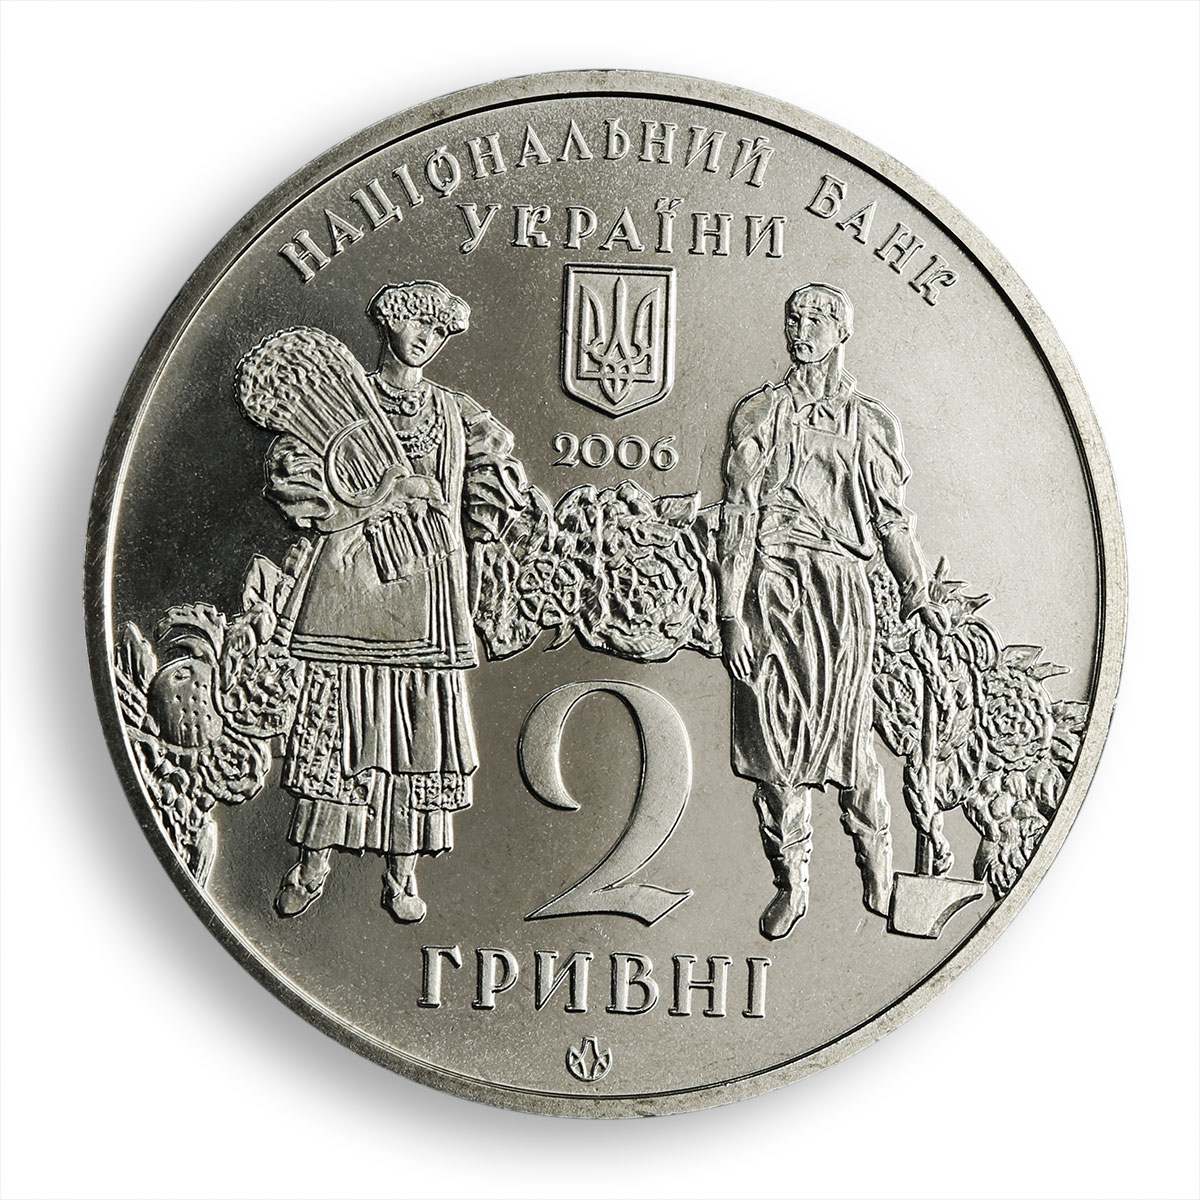 Ukraine 2 hryvnia Heorhiy Narbut Outstanding graphic artist UPR nickel coin 2006